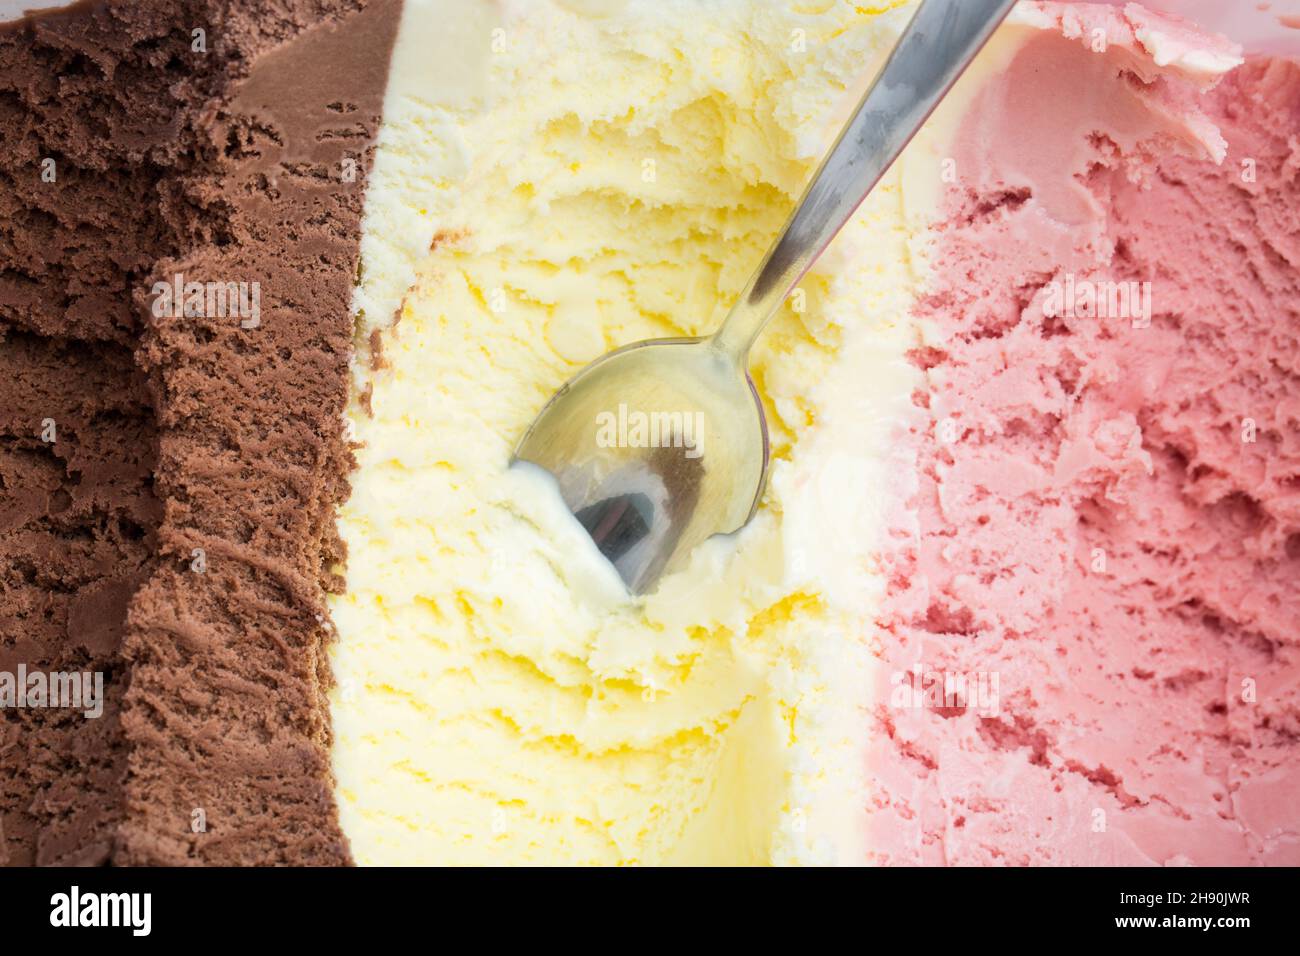 ice cream: A spoon in a large ice box with chocolate, vanilla and strawberry ice cream Stock Photo